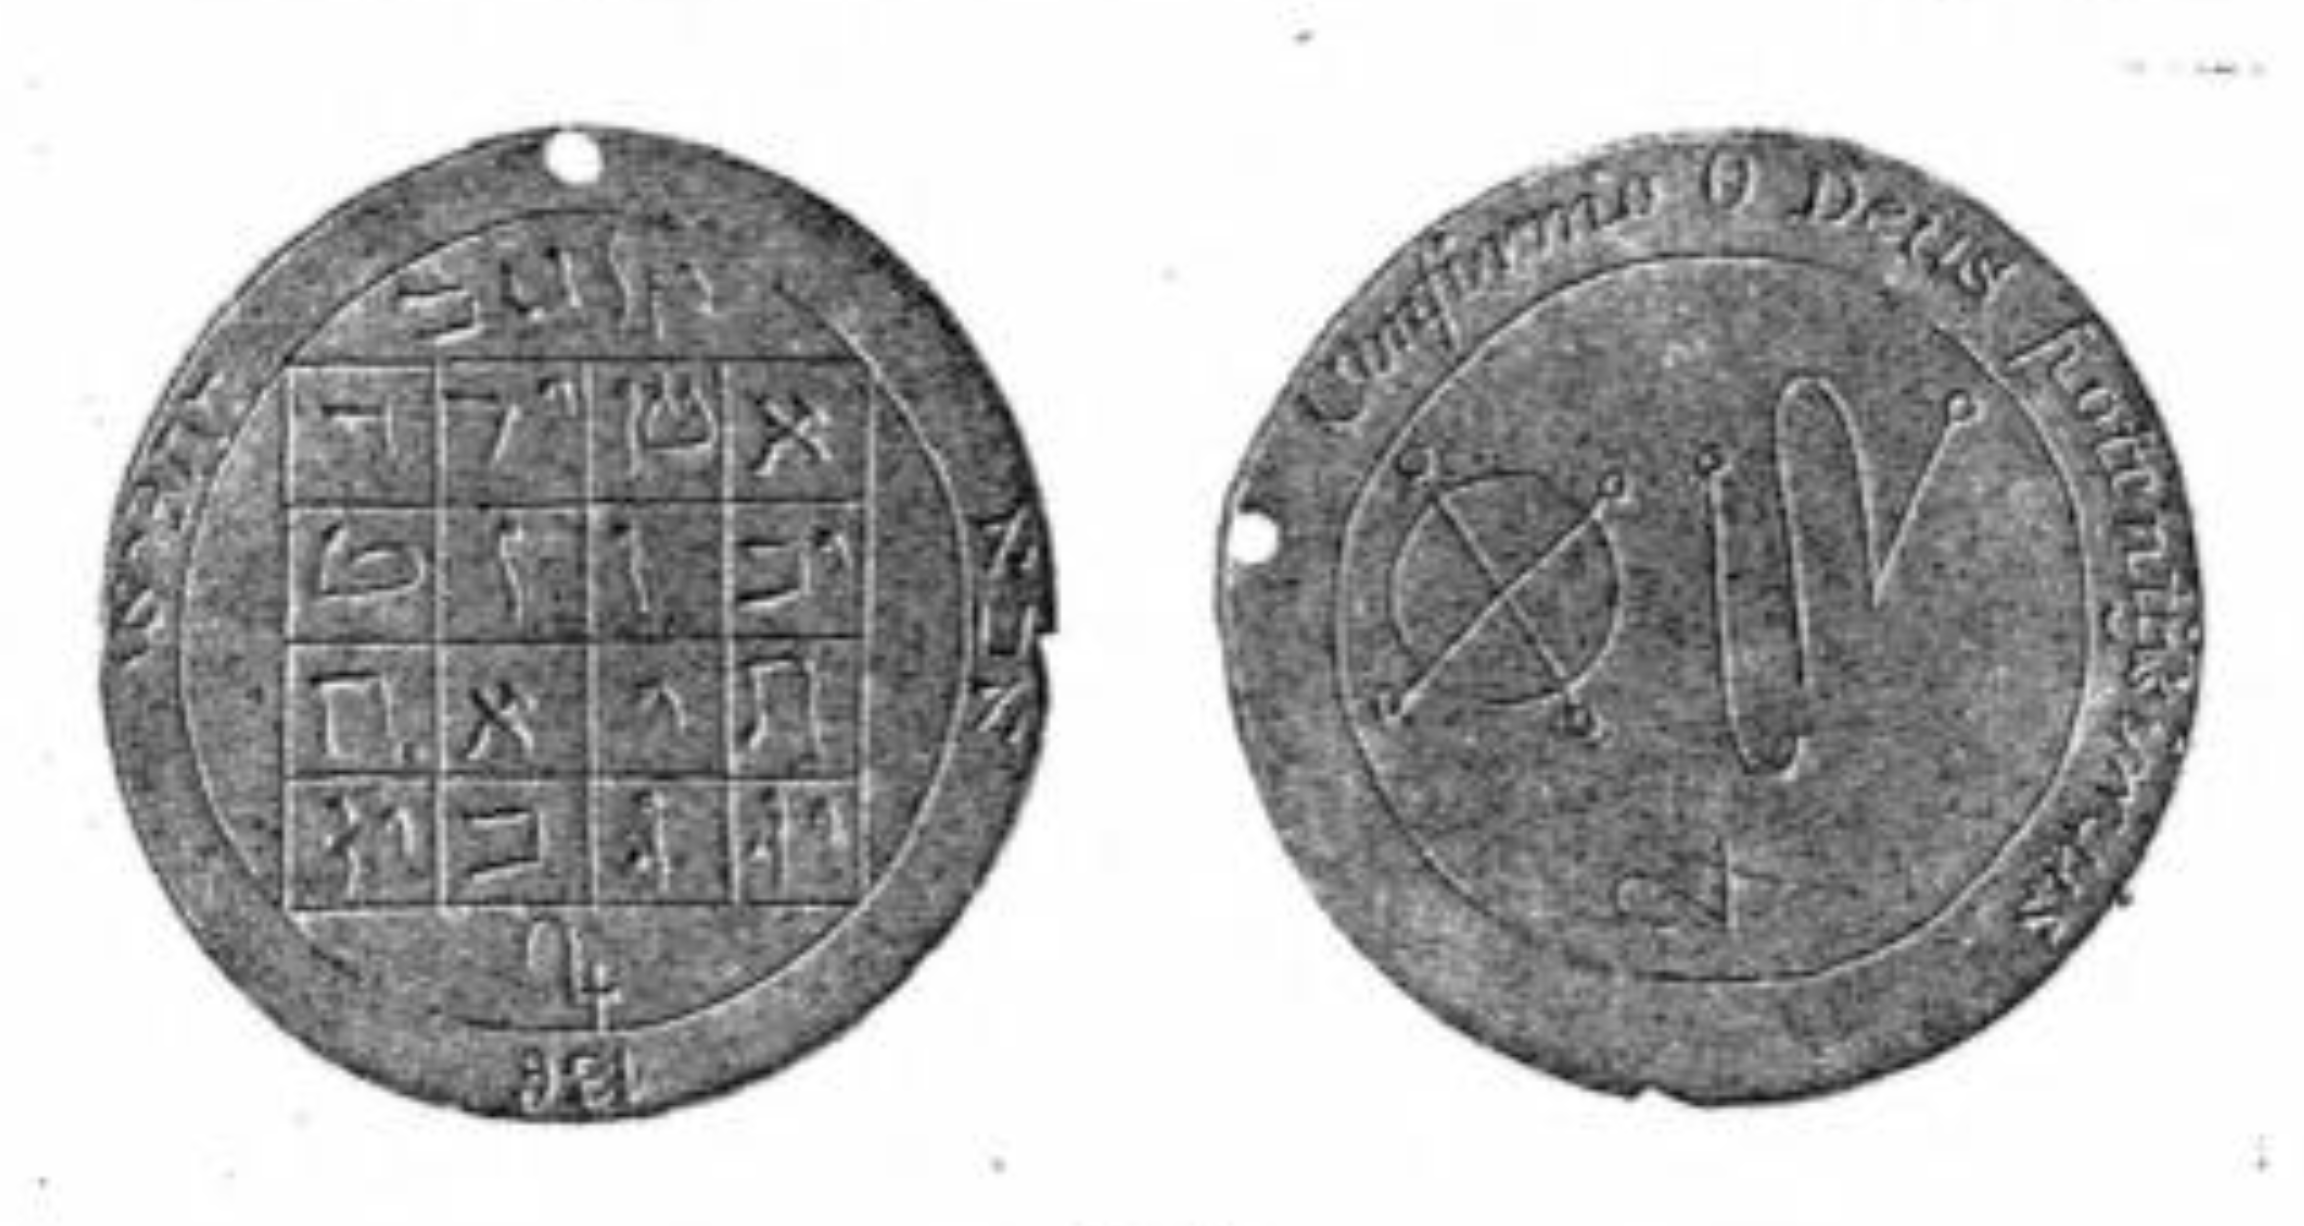 Jupiter Talisman example consisting of two sides of a coin, both covered in symbols.